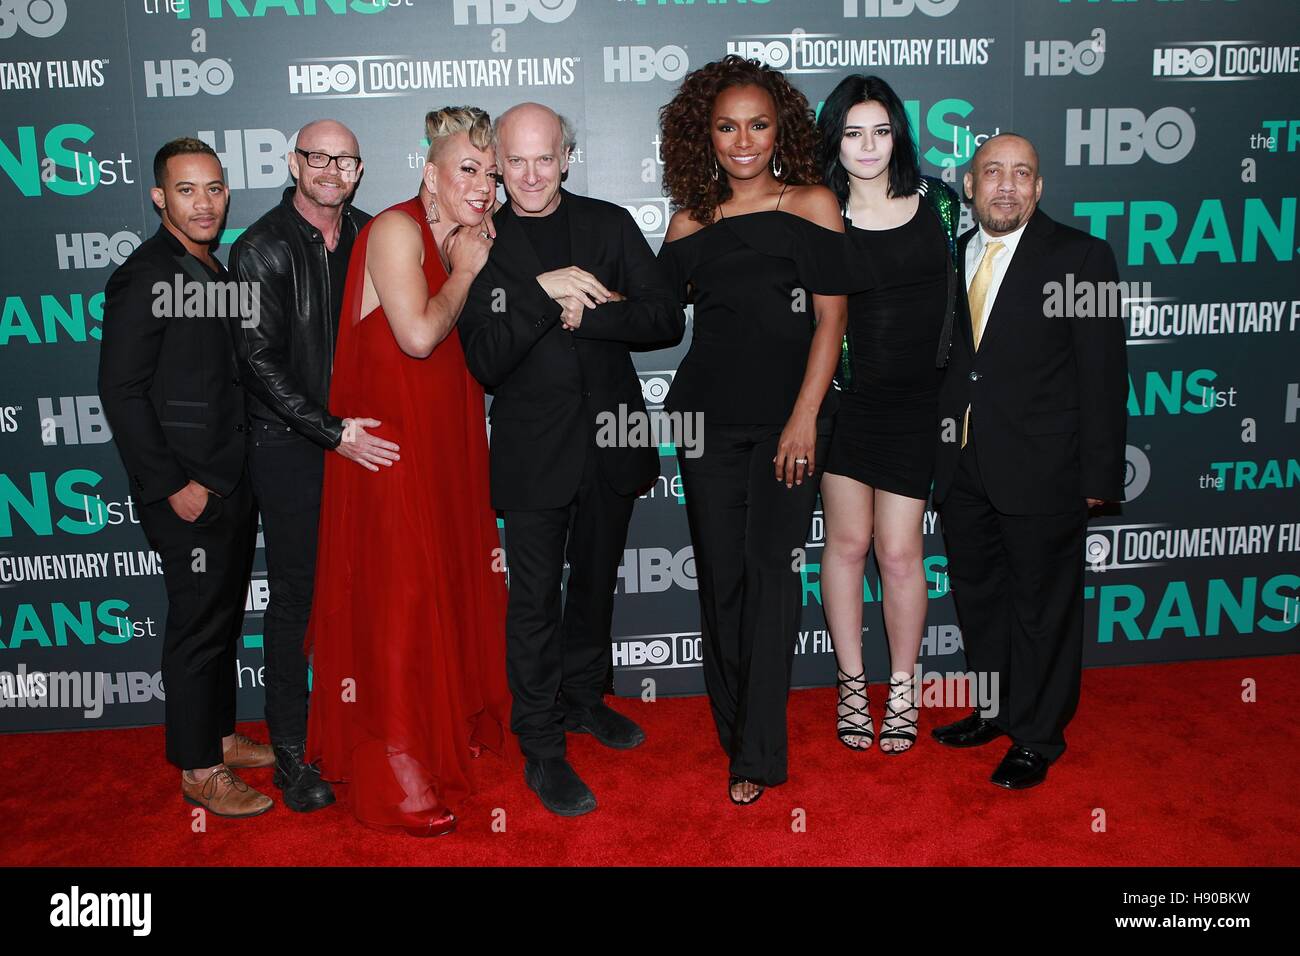 New York, NY, USA. 17th Nov, 2016. Shane Ortega, Buck Angel, Bamby Salcedo, Timothy Greenfield Sanders, Janet Mock Nicole Maines and Kylar Broadus at HBO Documentary Films New York Premiere of 'THE TRANS LIST' at The Paley Center for Media on November 17, Stock Photo